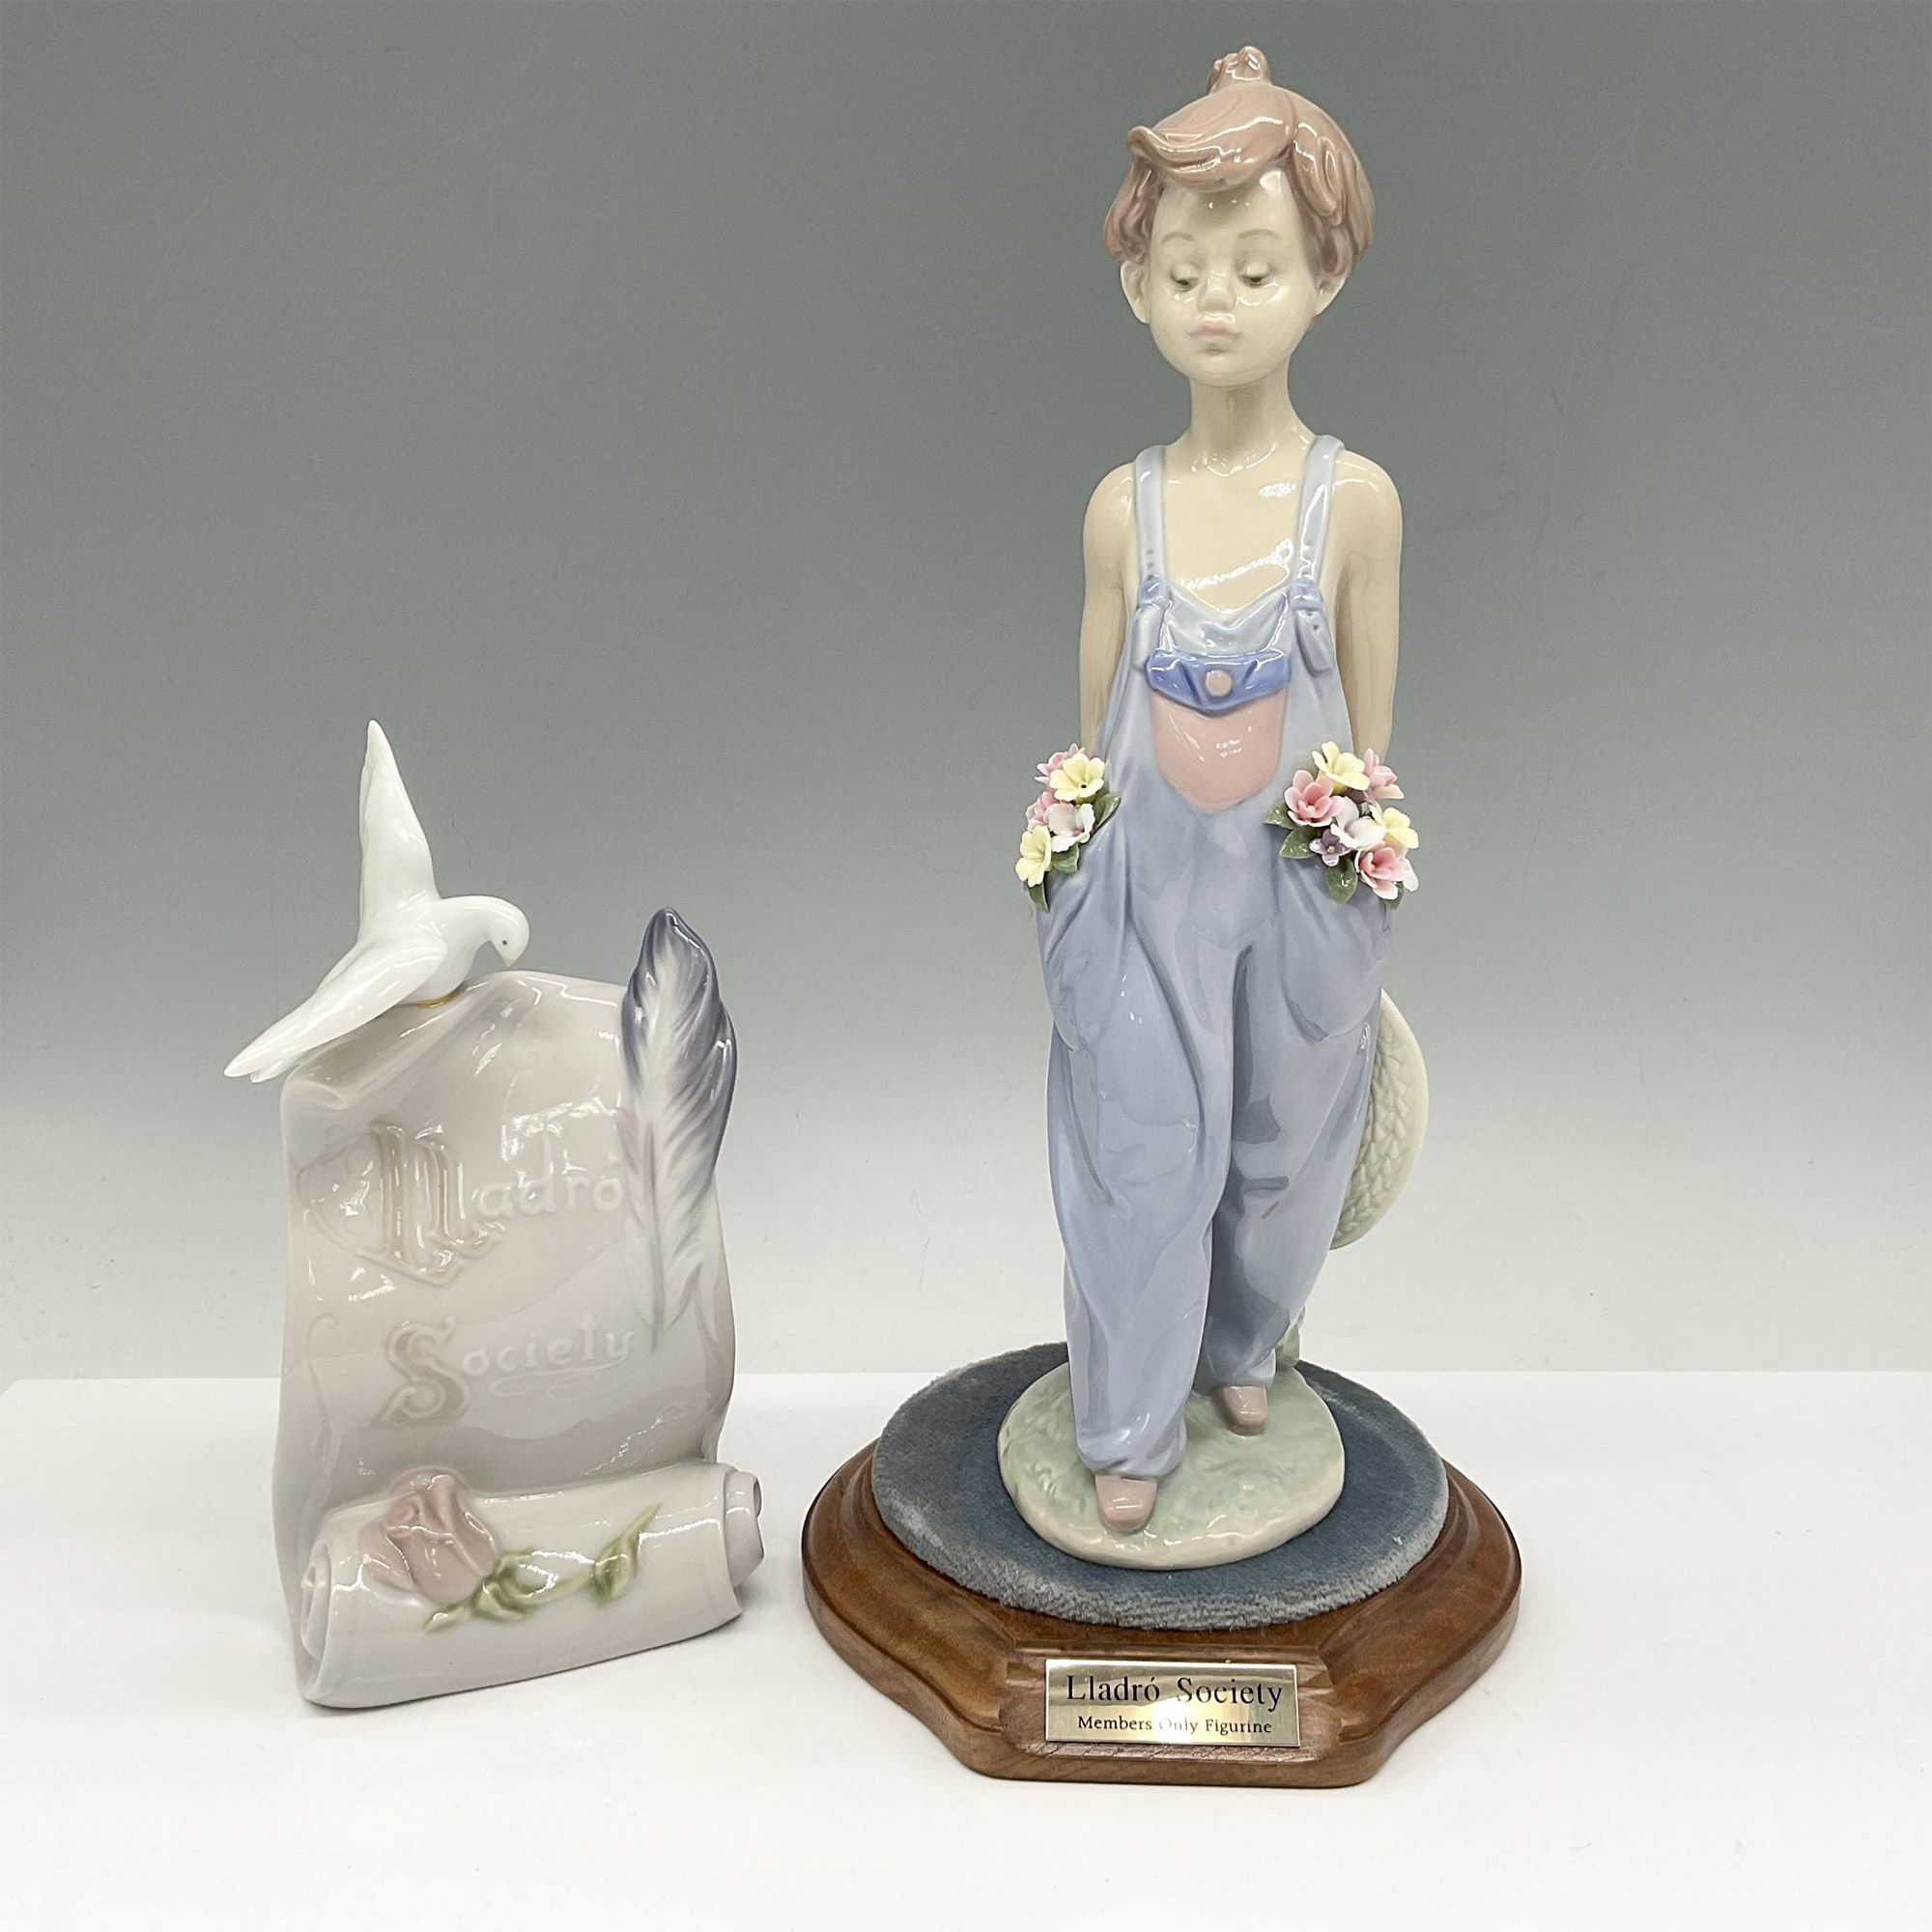 3pc Lladro Figurines Pocket Full of Wishes 100765